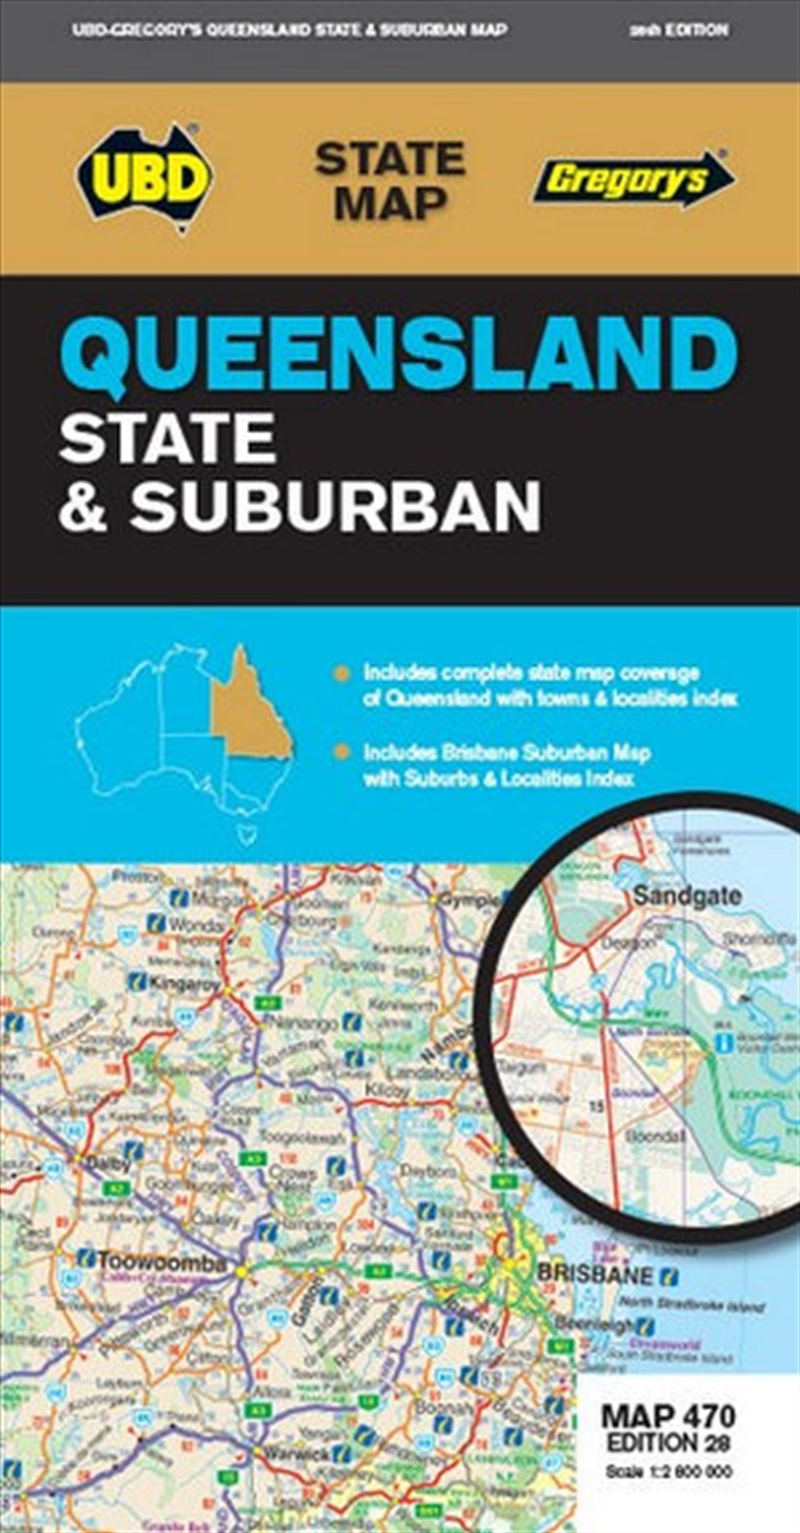 Queensland : State & Suburban - Map 470/Product Detail/Geography